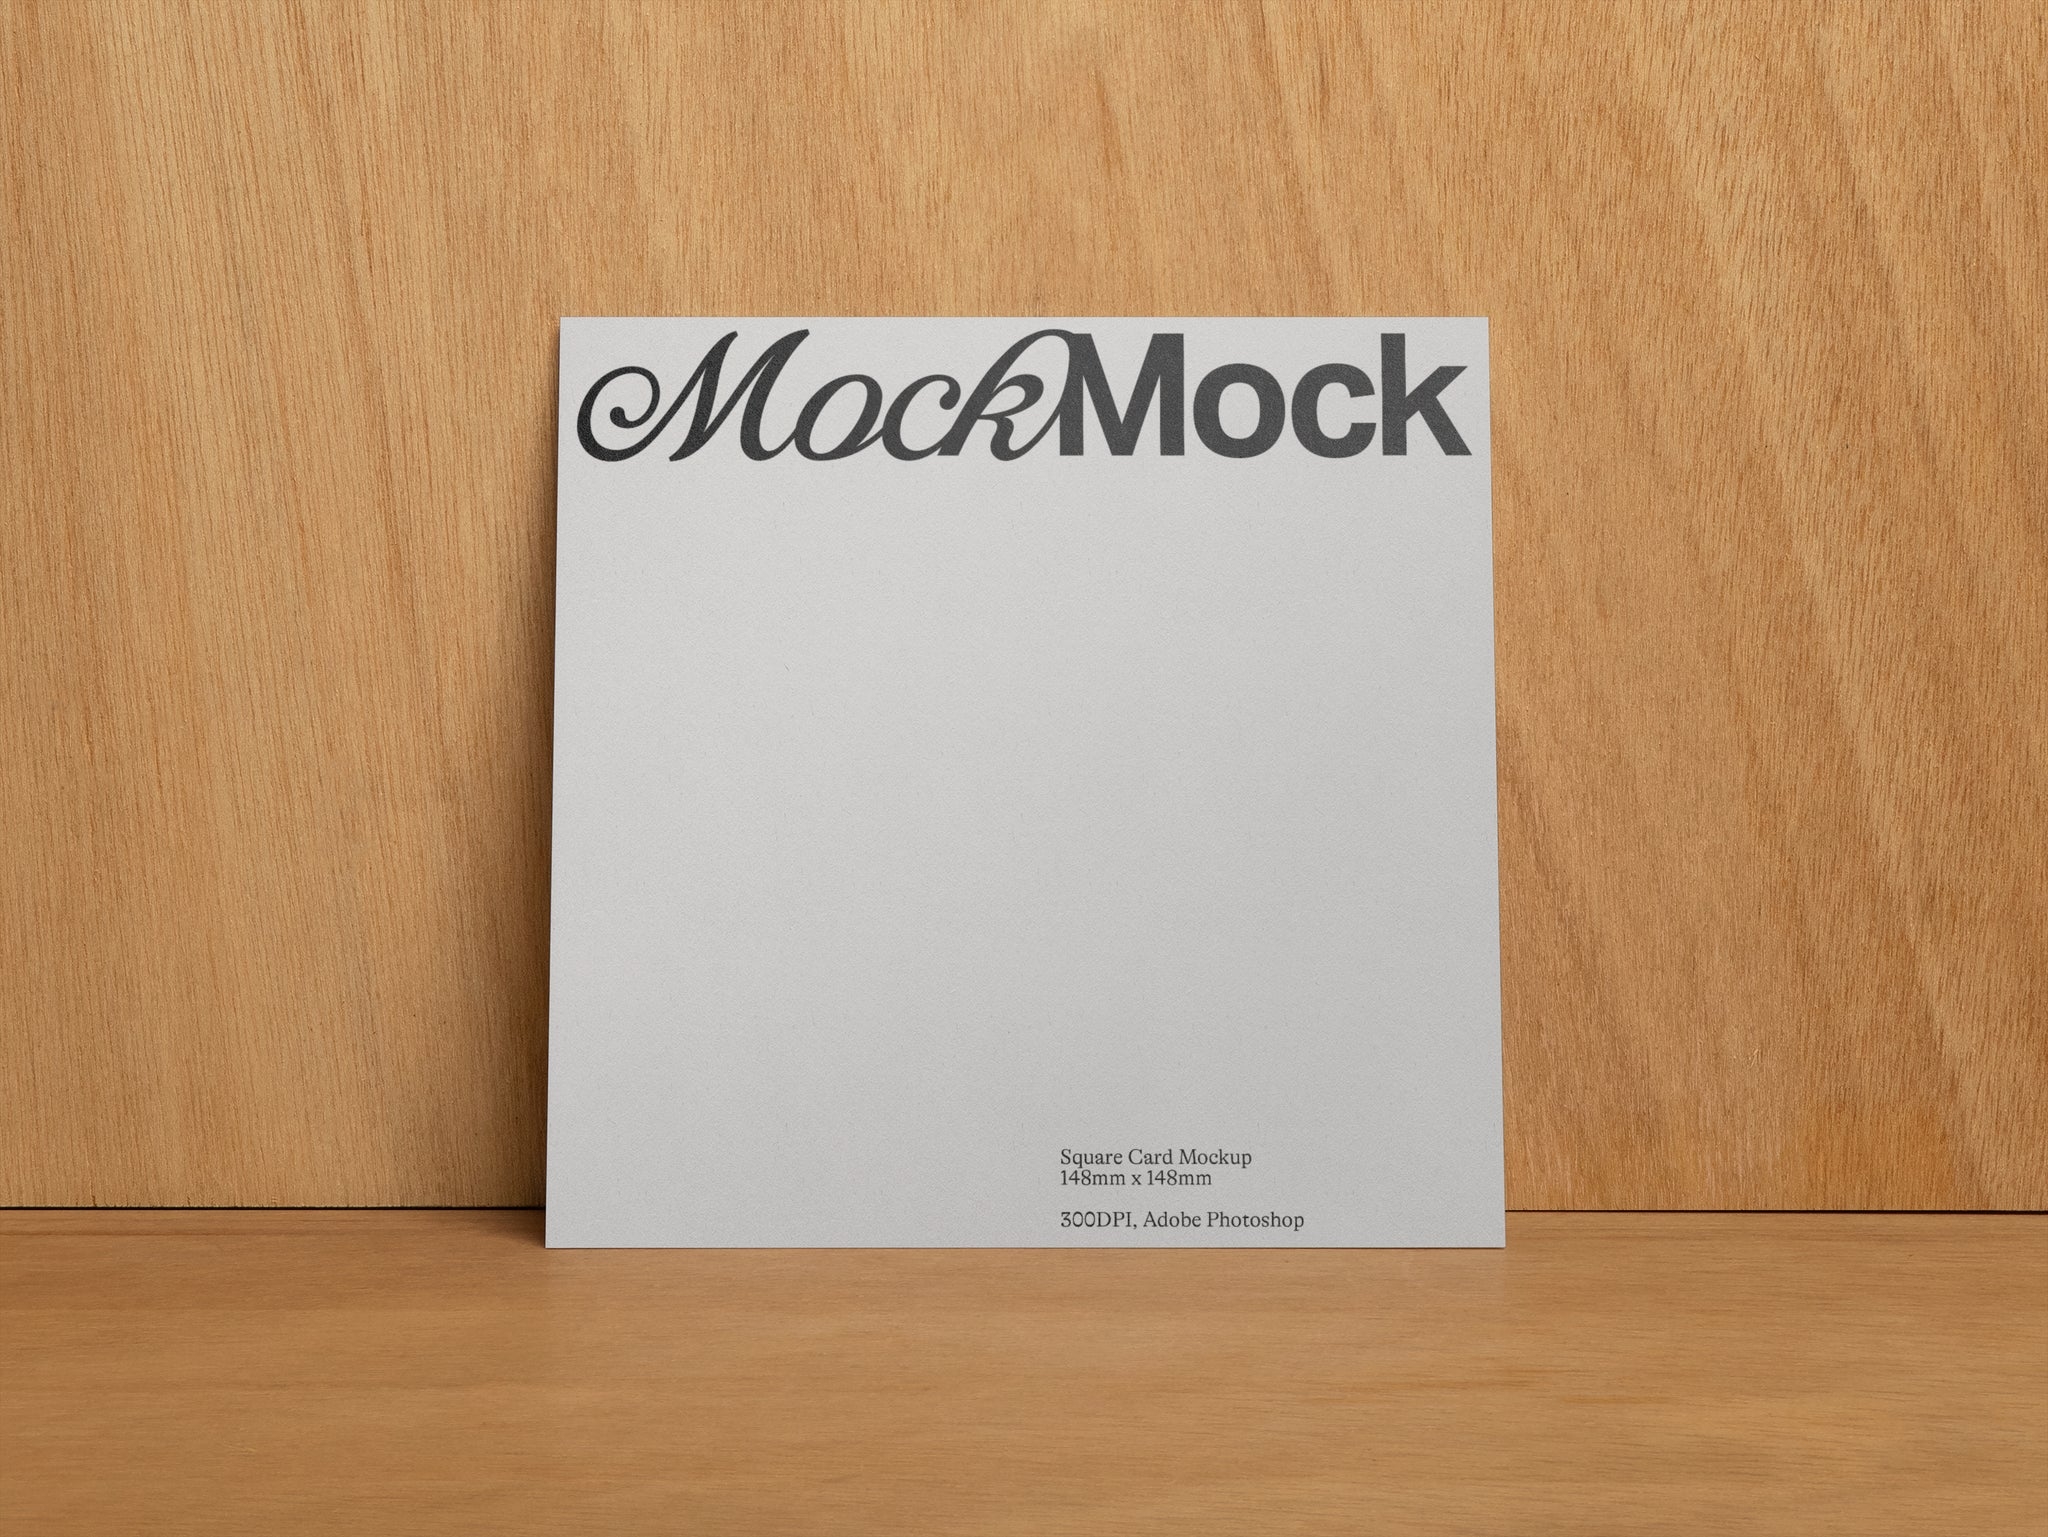 Square Print Mockup standing against a wooden background